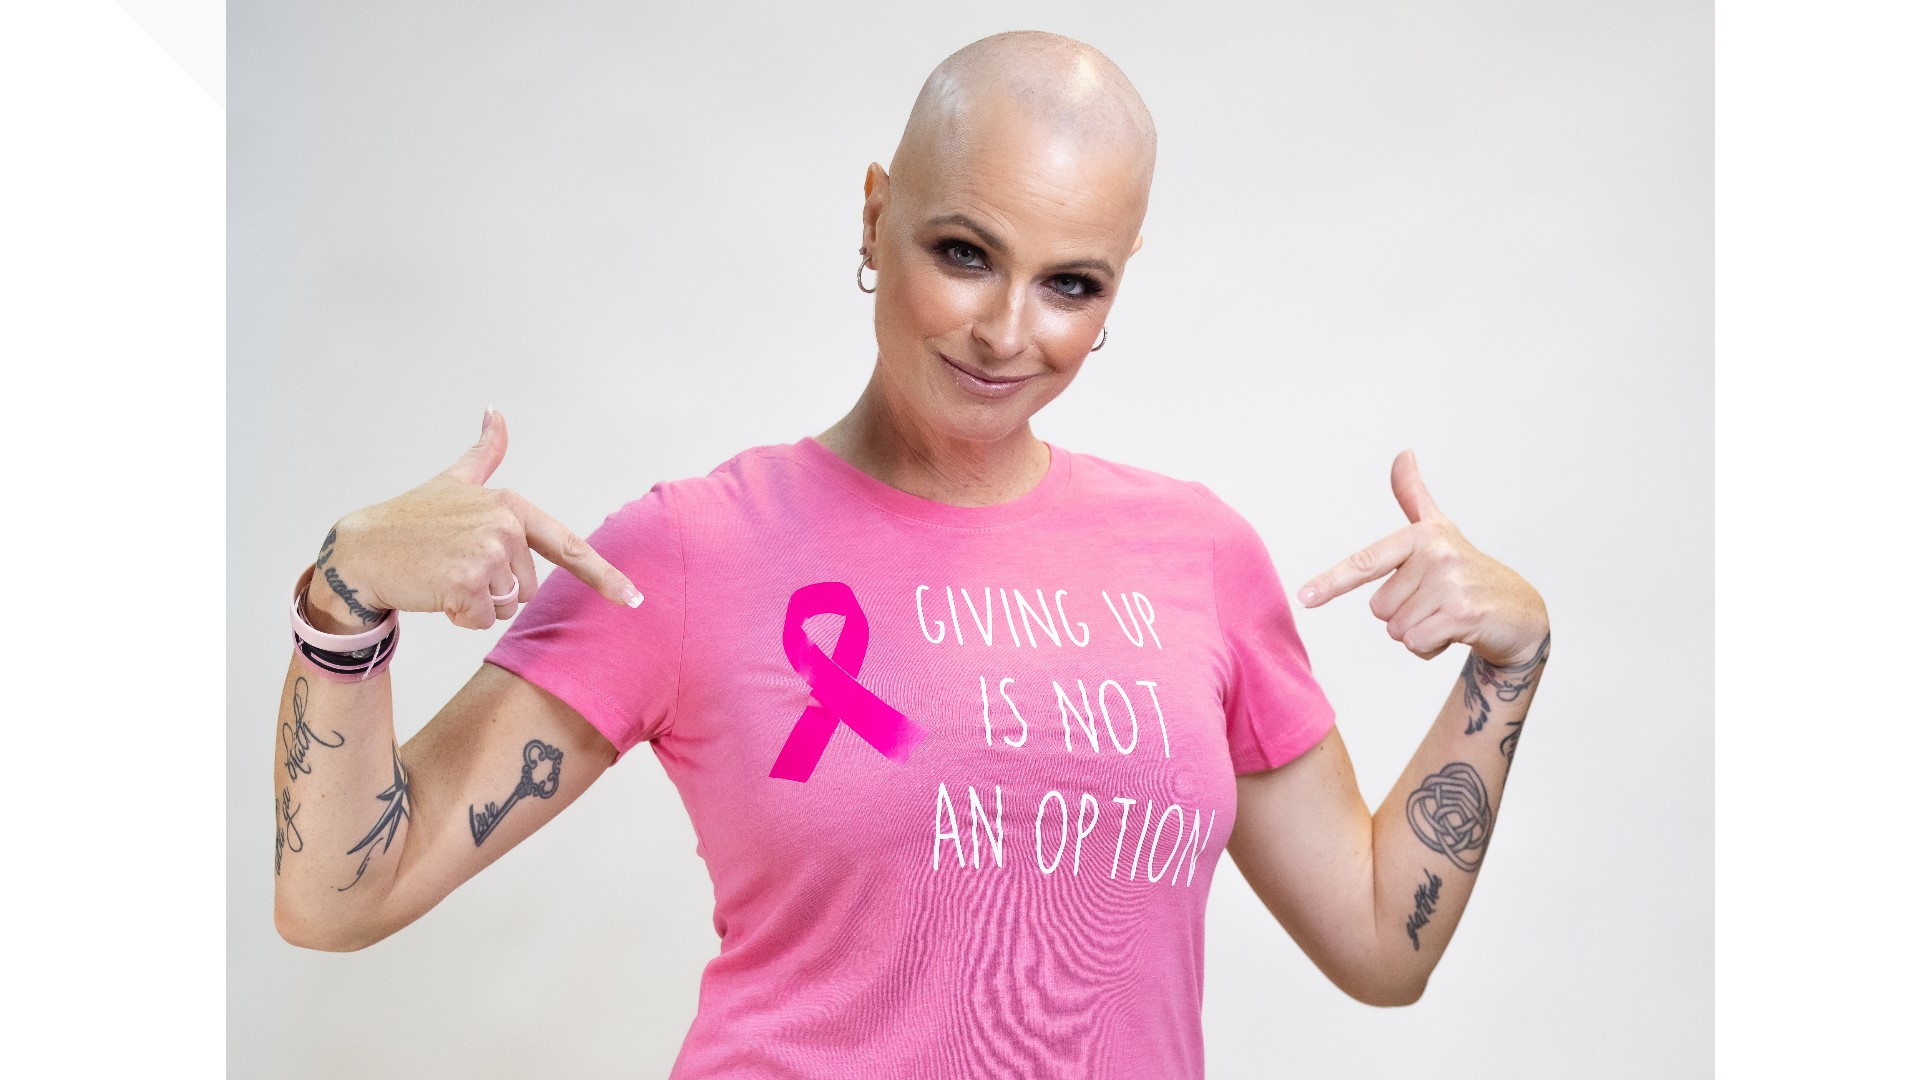 "This is a journey that nobody should go through alone," Cheri Andrew said as she's battling another fight against breast cancer.